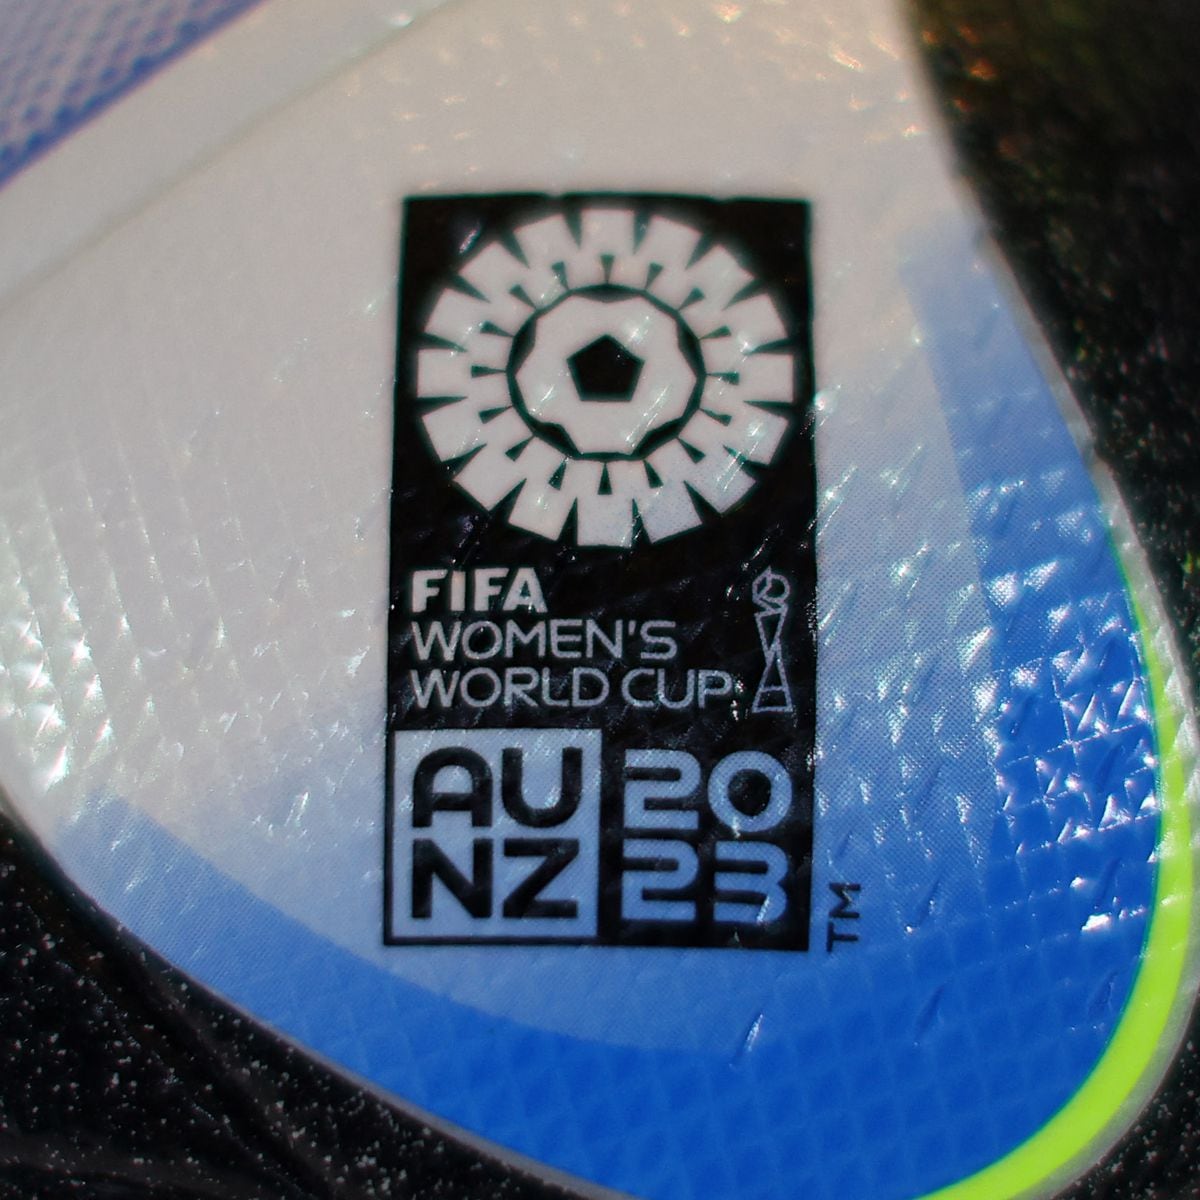 Close up of a FIFA World Champions Badge as seen on the Spanish